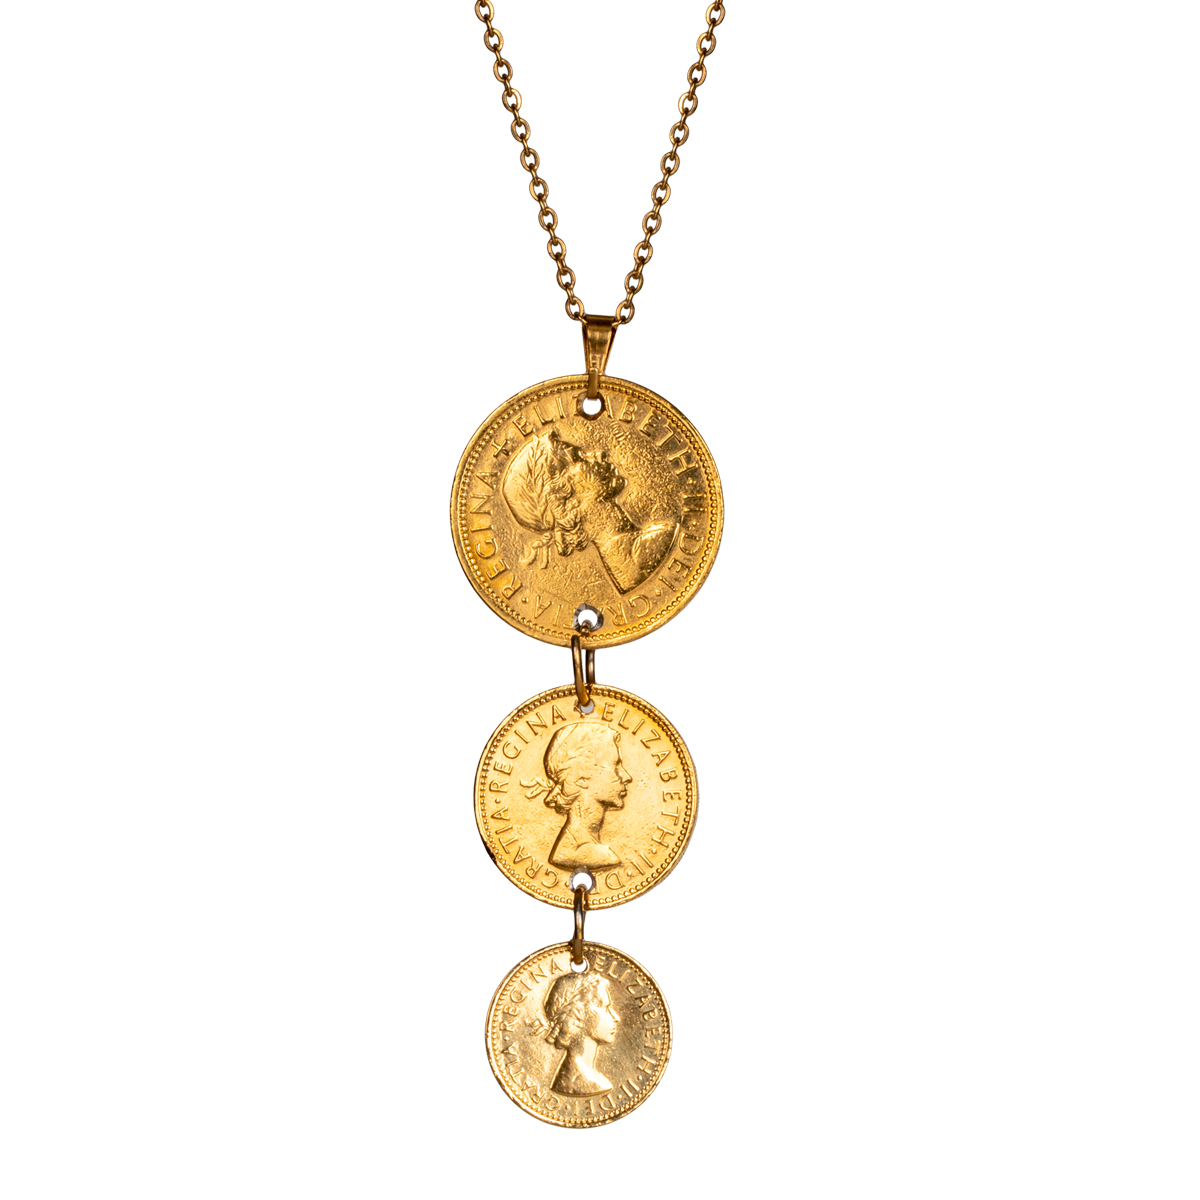 Solid Gold Coin Necklace, Gold Coin Pendant Necklace, Antique Necklace,  British Coin Gold Necklace, 14k Gold Necklace - Etsy Israel